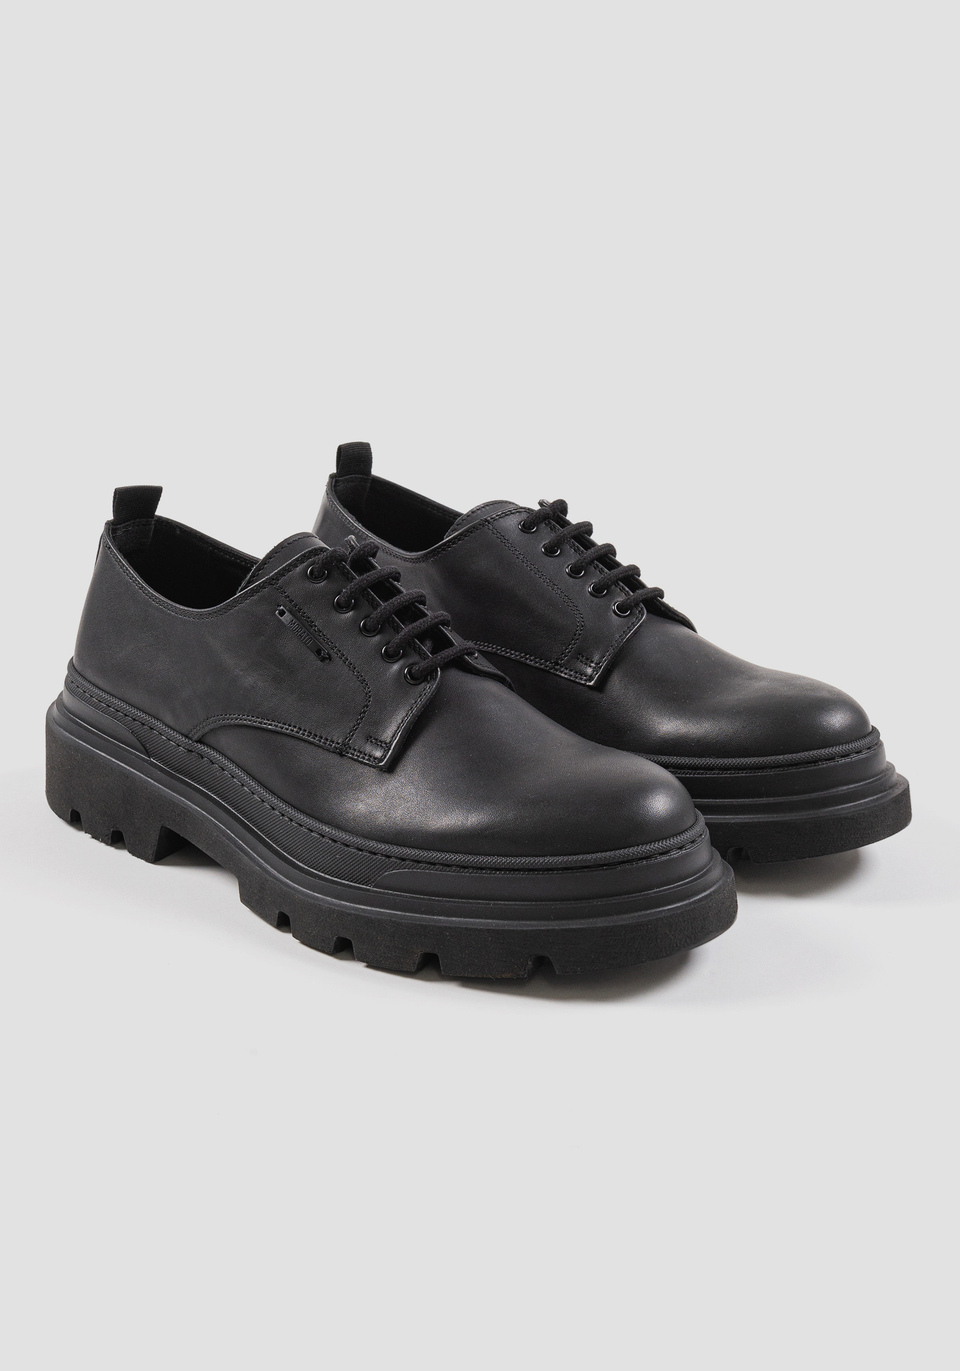 "YUKON" LEATHER DERBY SHOES WITH LUG SOLES - Antony Morato Online Shop